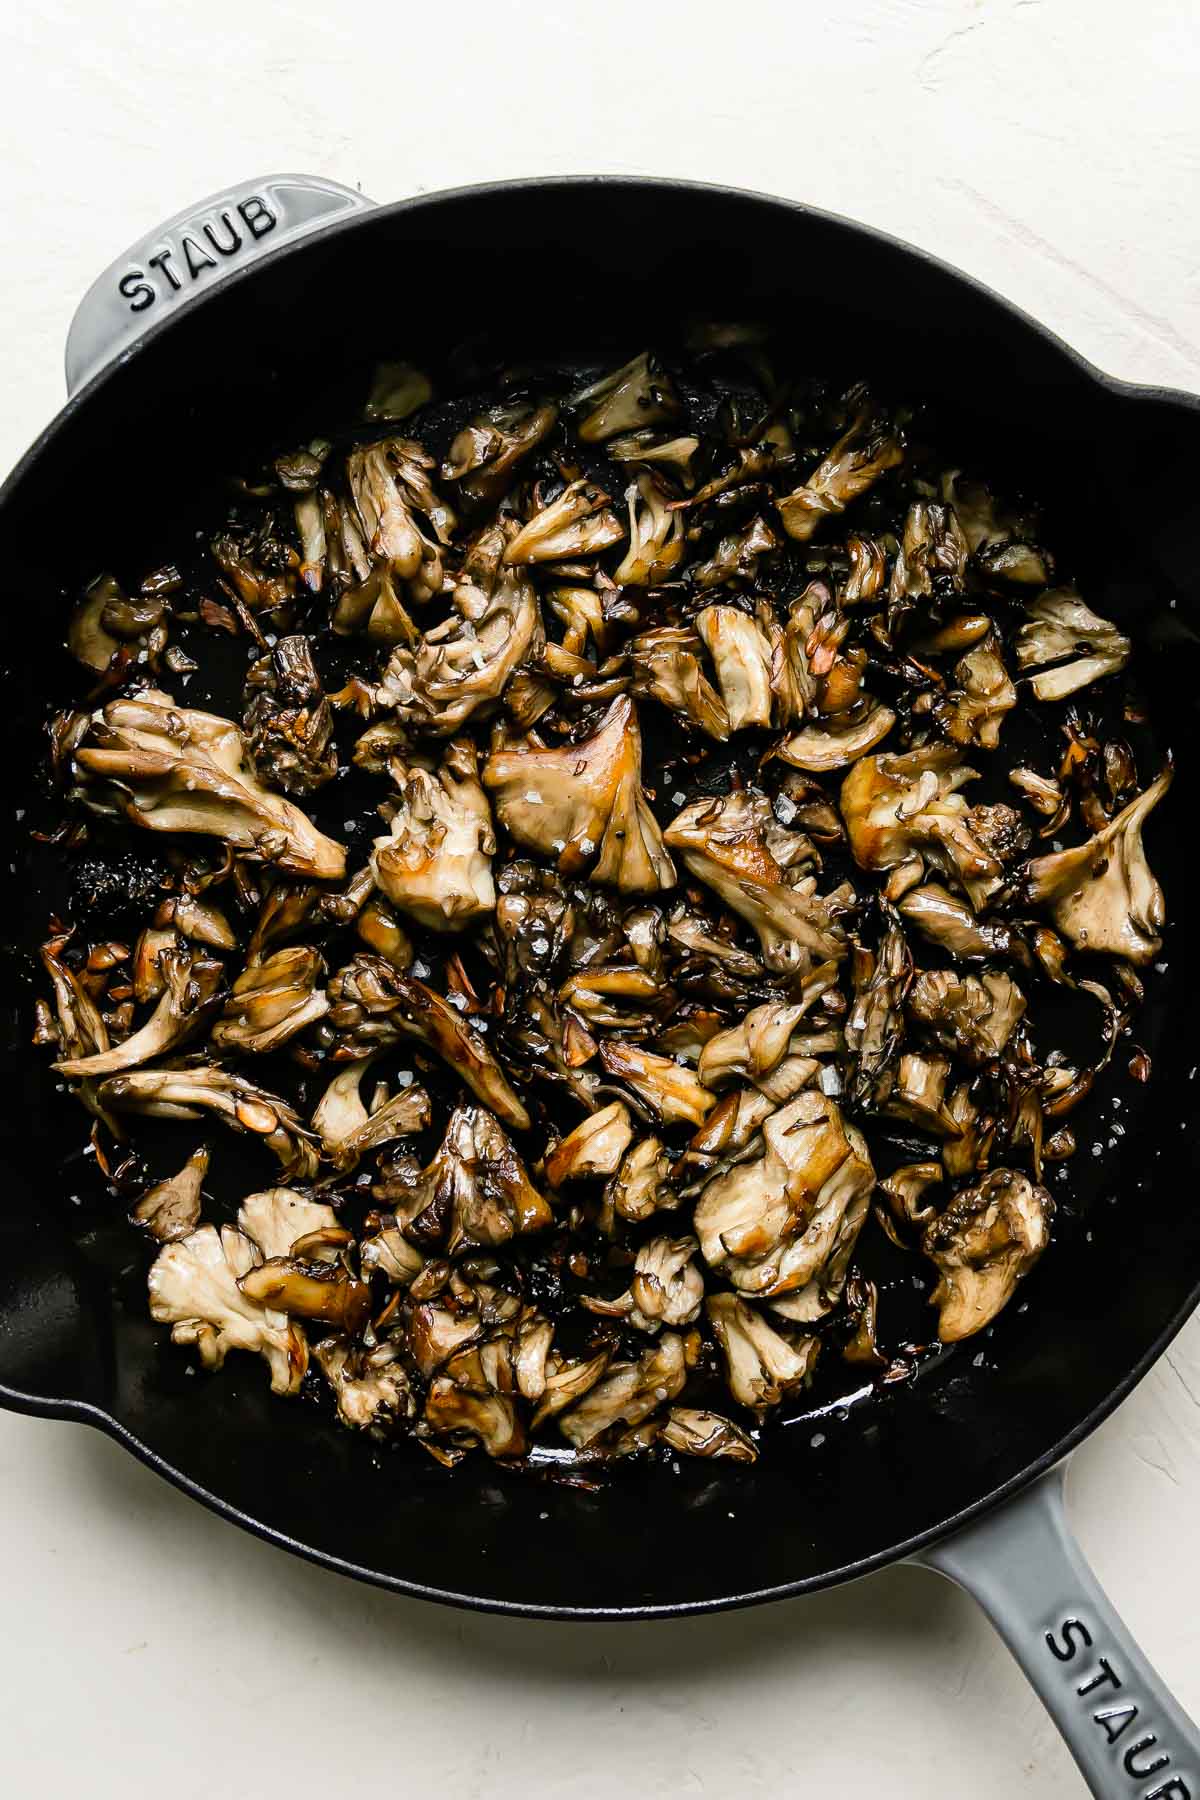 Pan-roasted mushrooms fill a light gray Staub cast iron skillet. The skillet sits atop a creamy white textured surface.